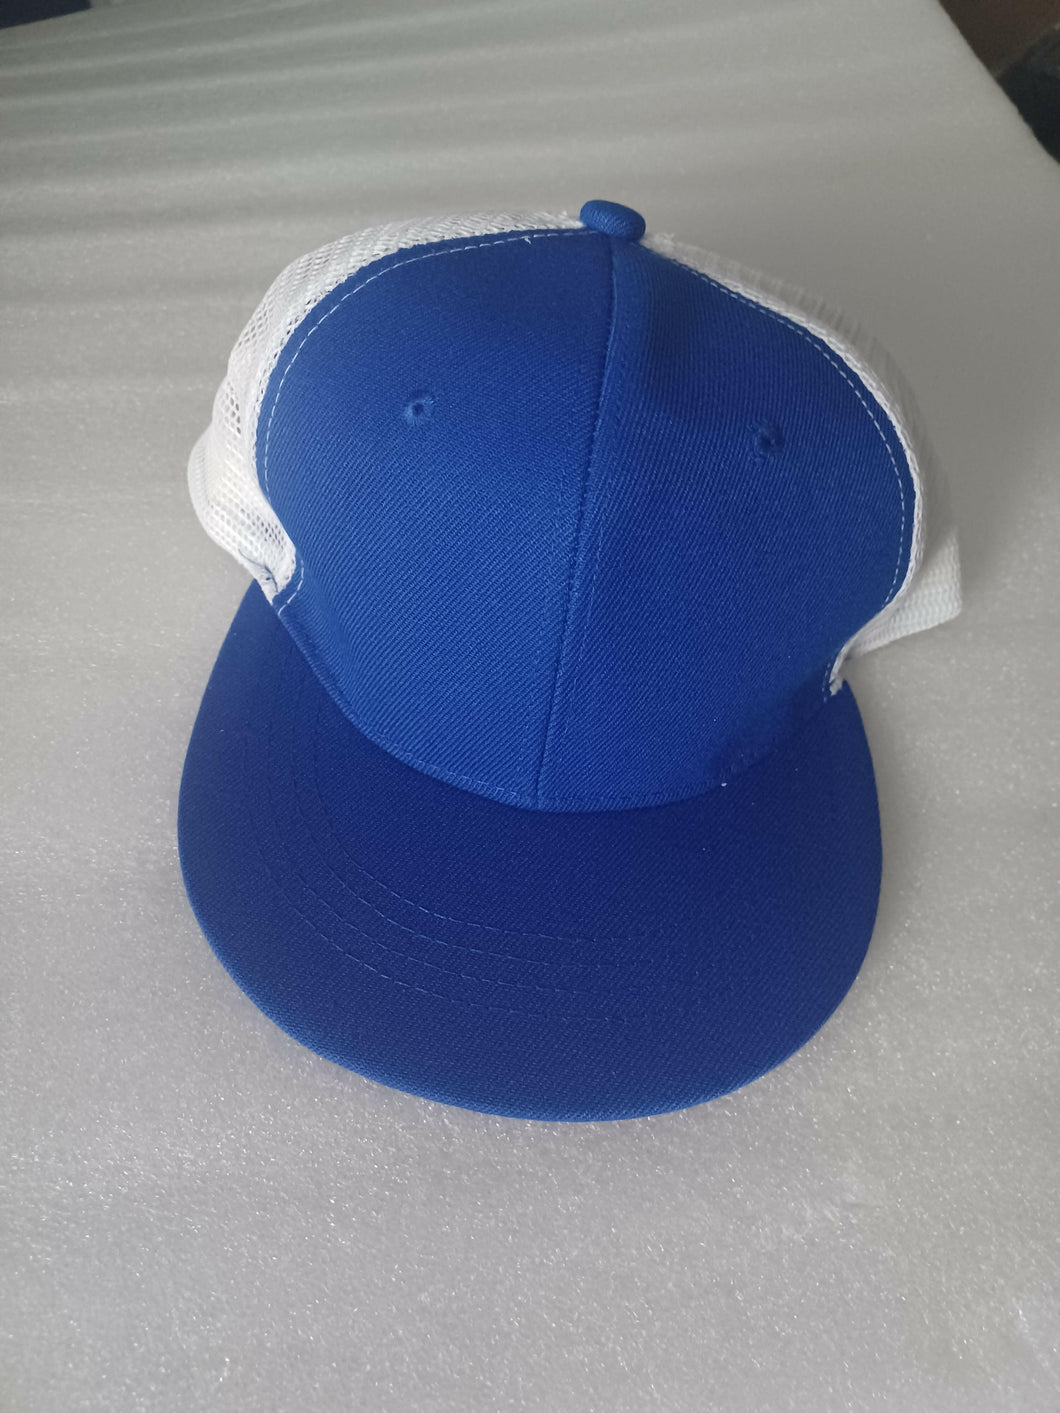 Breathable Customizable Blank Baseball Caps: Perfect for Summer.